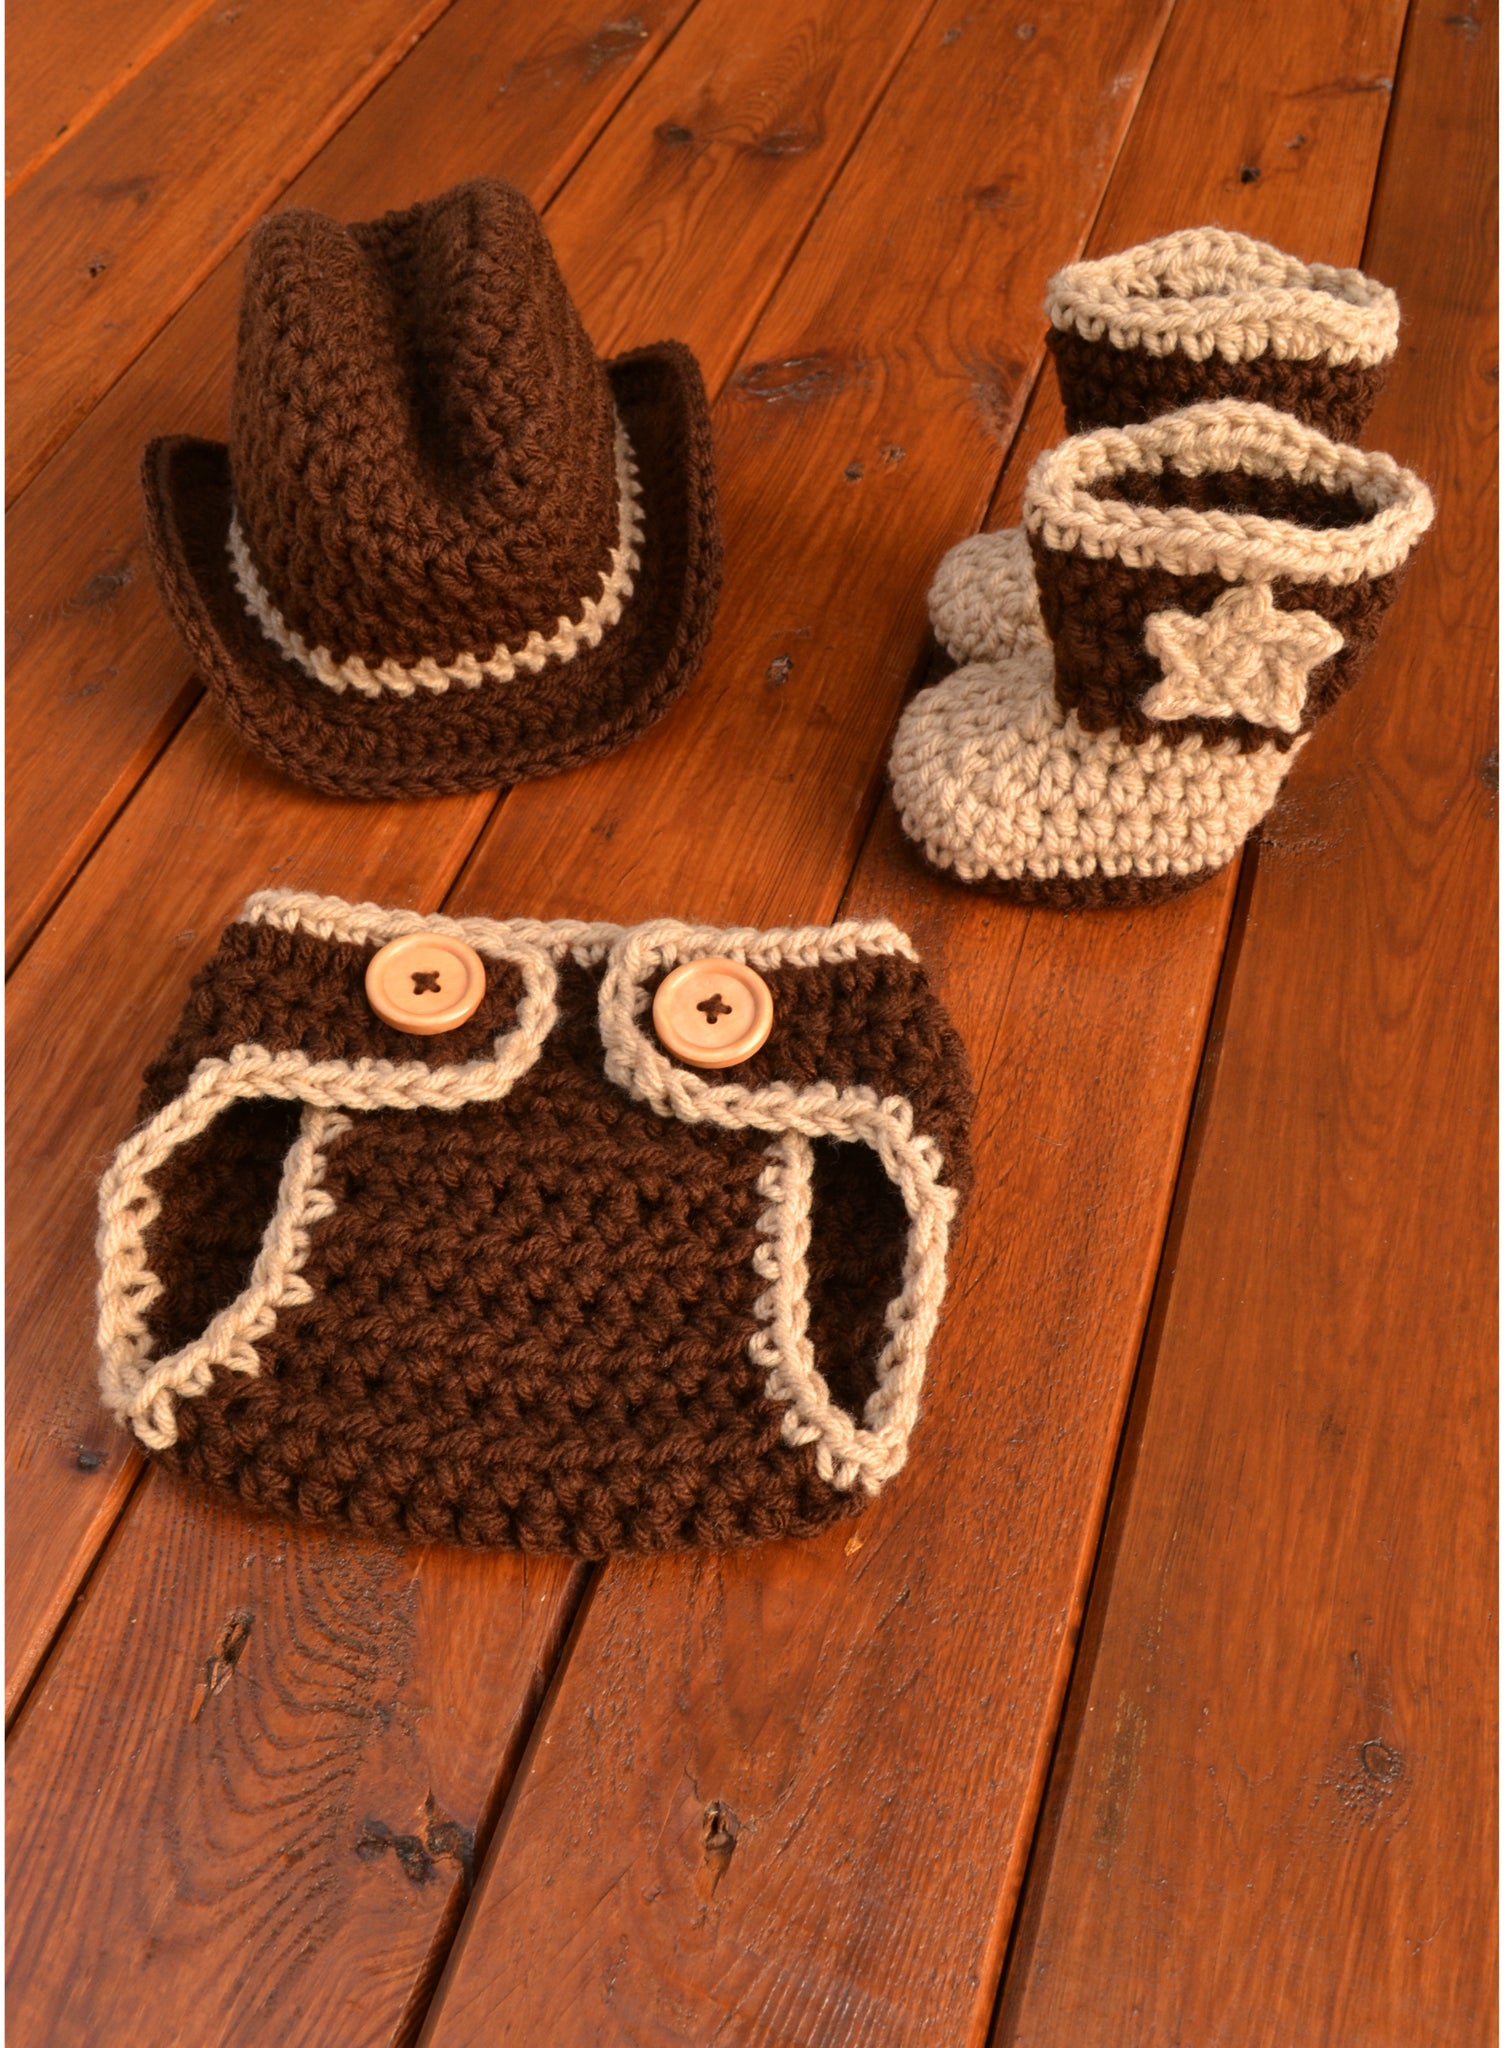 Crochet Baby Cowboy Outfit For Photo Shoot – CrochetBabyProps